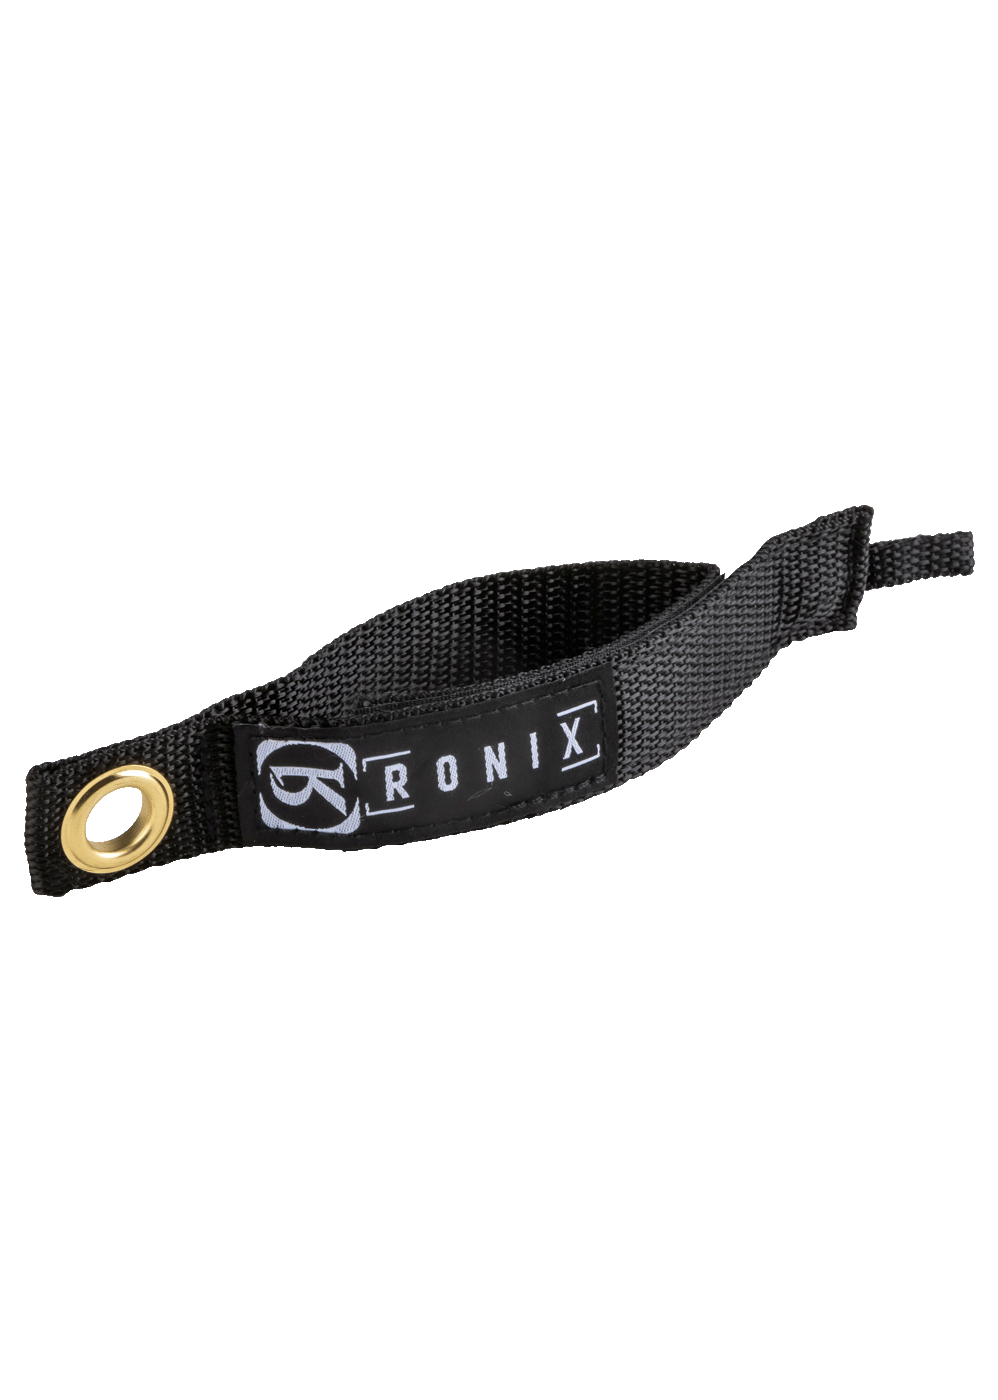 Ronix Rope Caddy Velcro Wrap Up